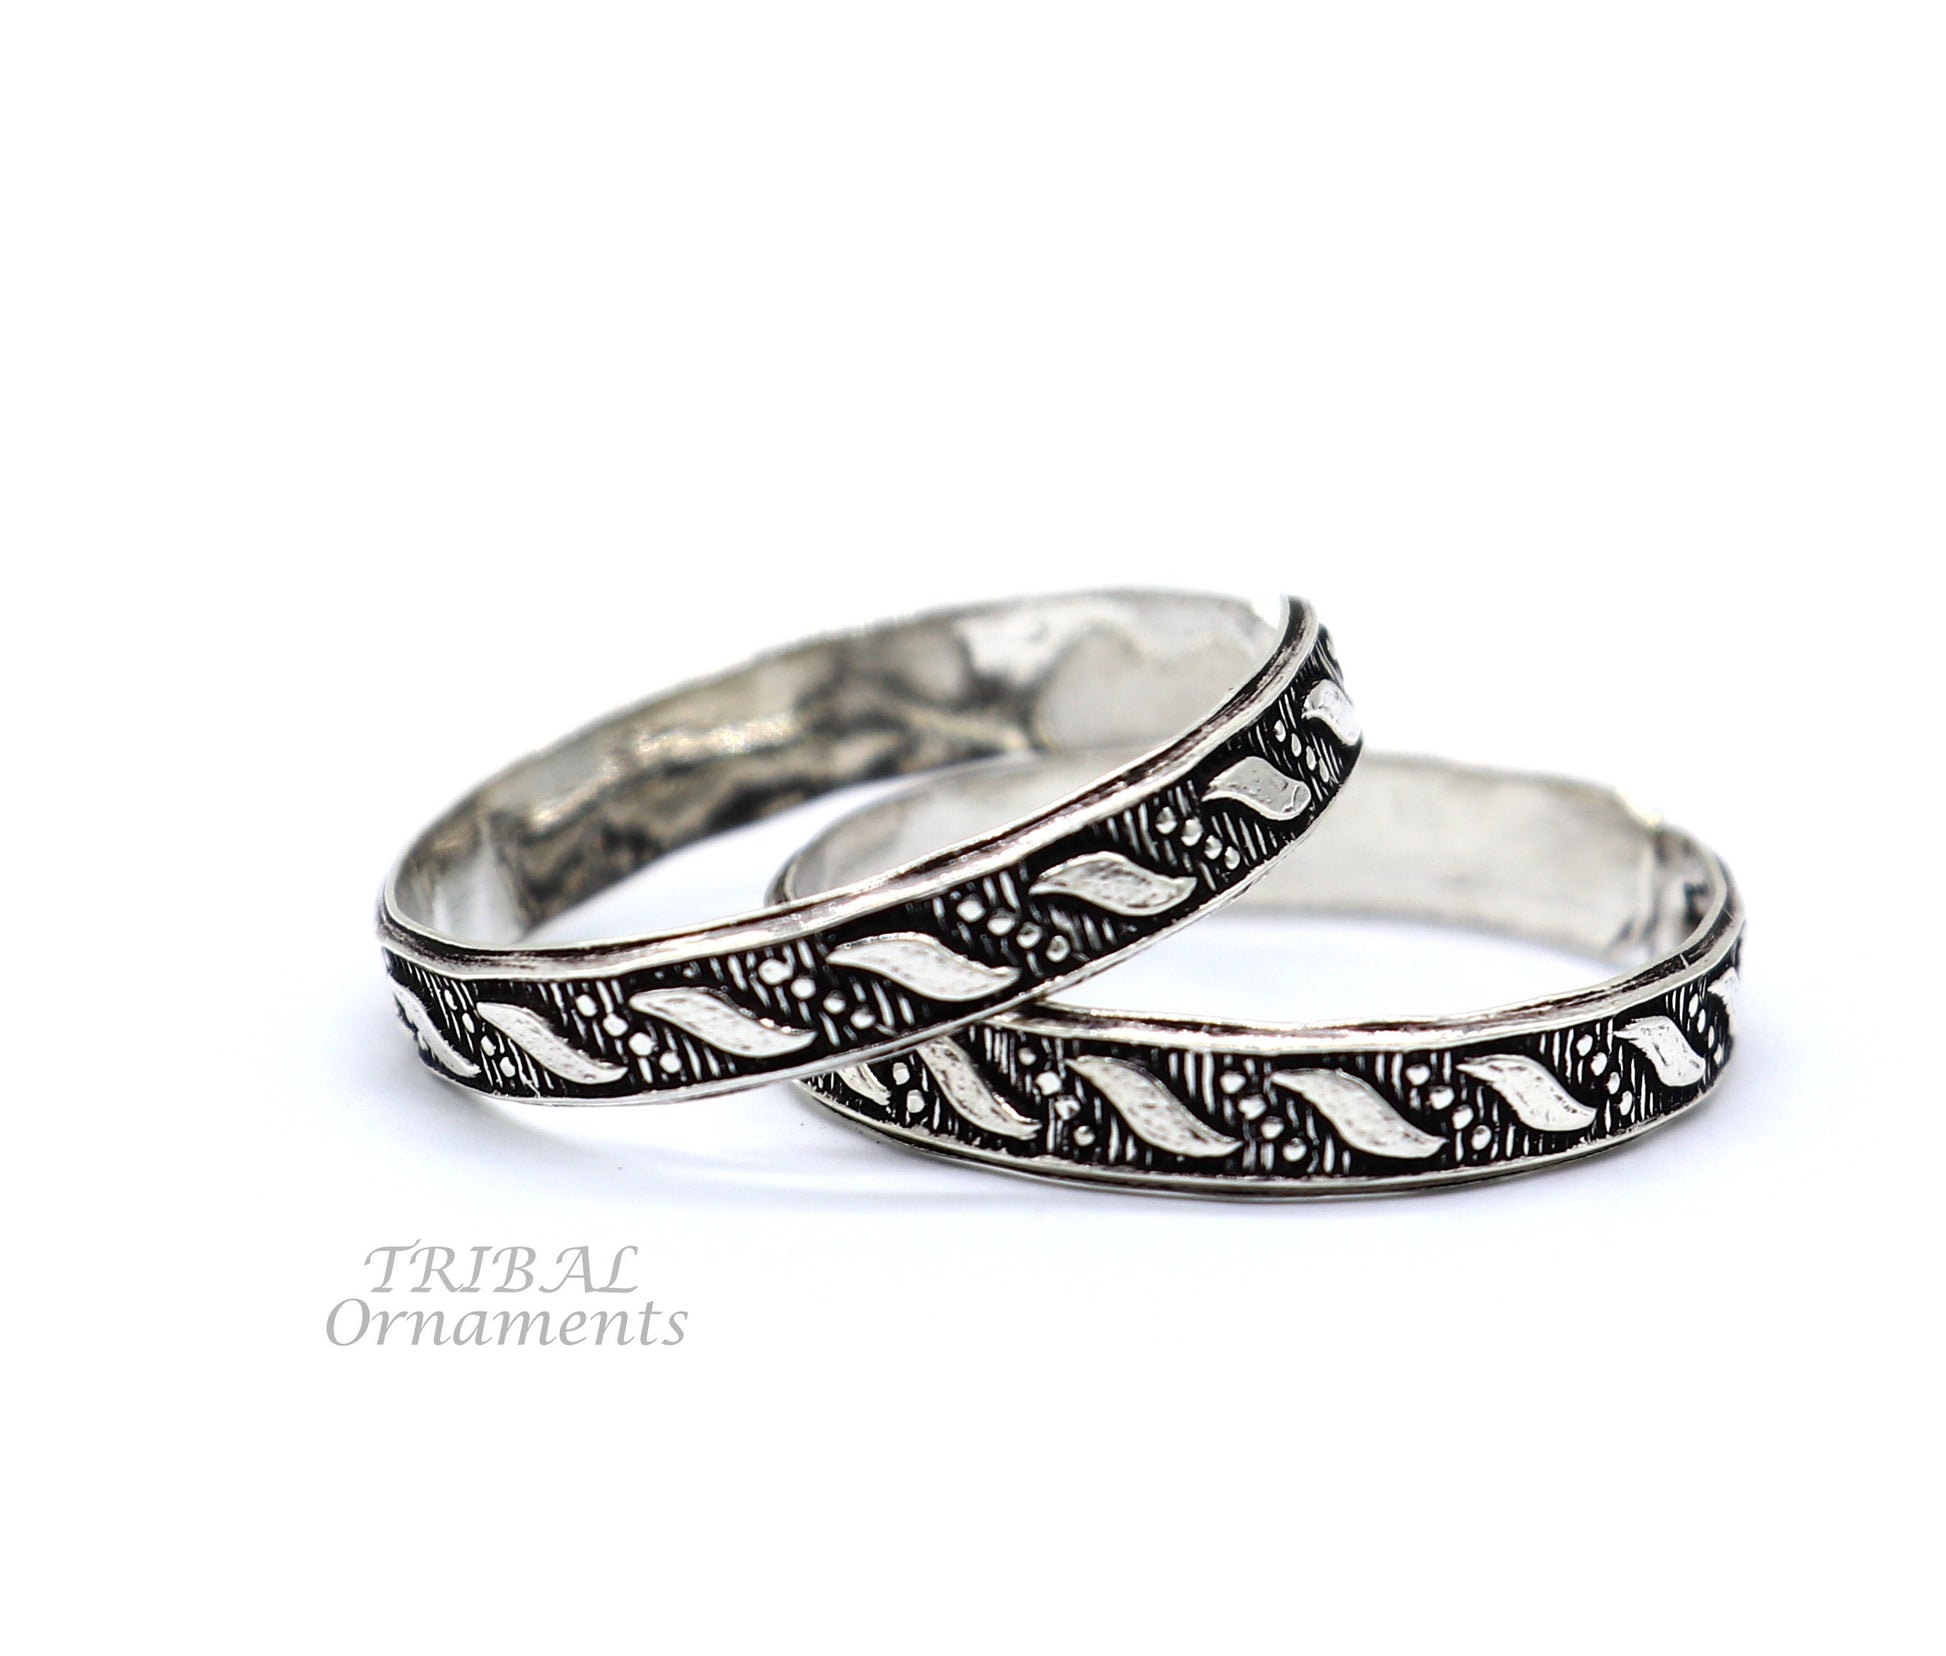 Best brides thumb ring, 92.5 sterling silver customized adjustable vintage style handmade toe ring band for girl's women's  ntr72 - TRIBAL ORNAMENTS